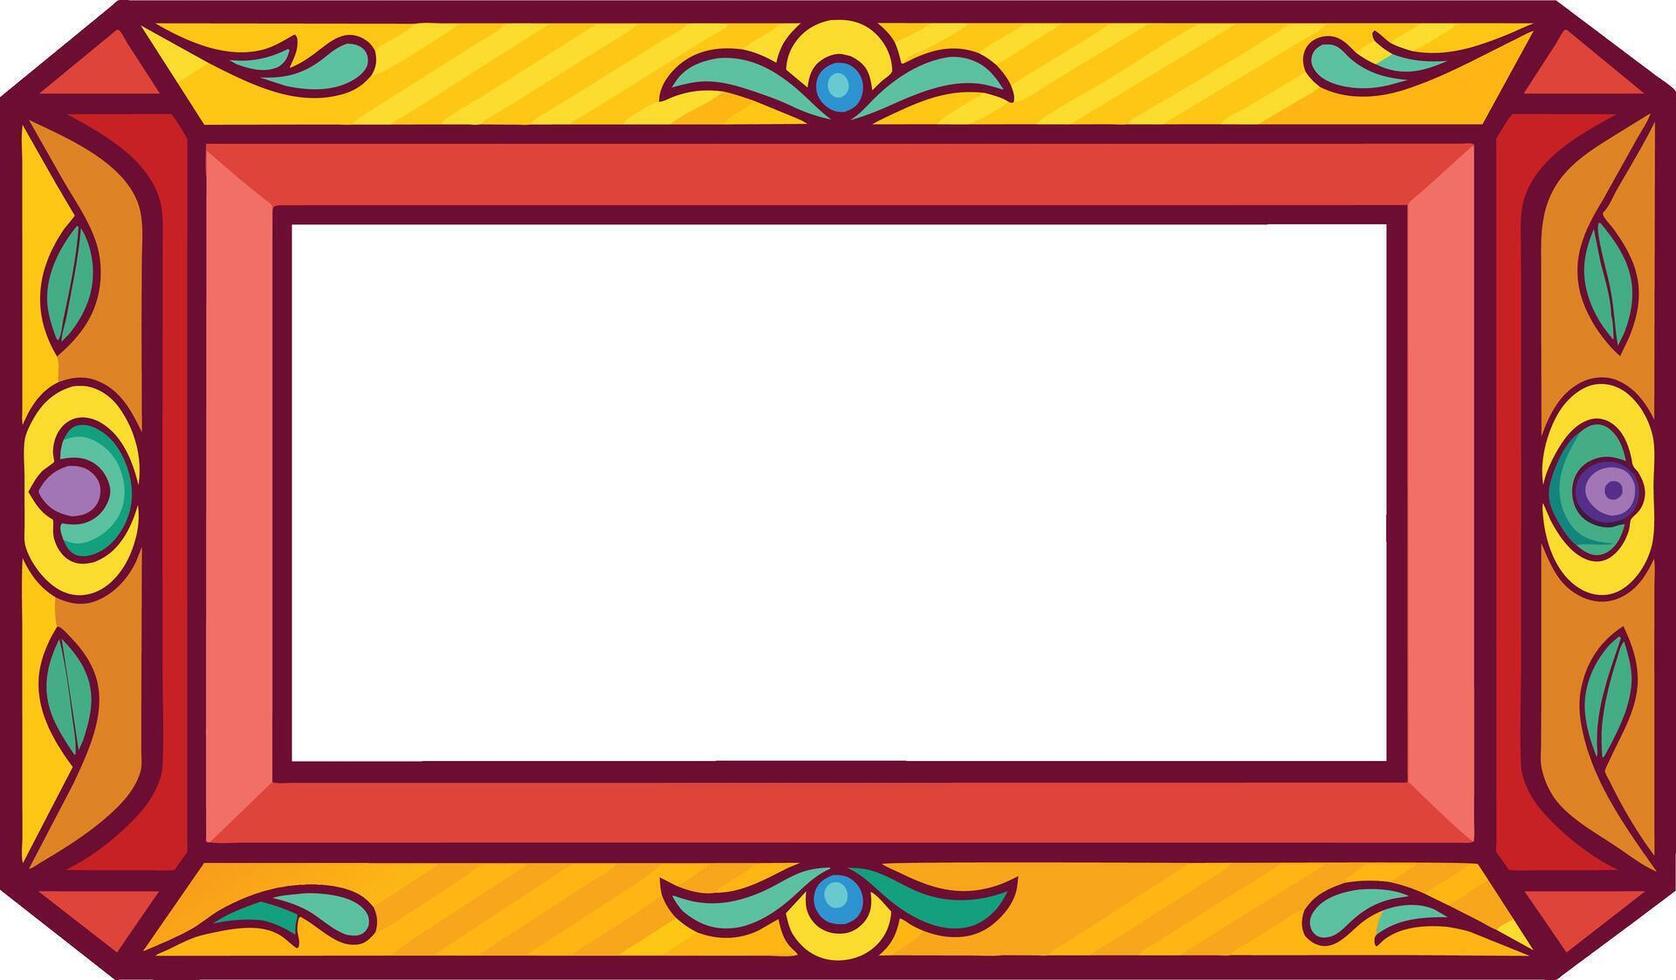 an ornate rectangle frame with a colorful border vector